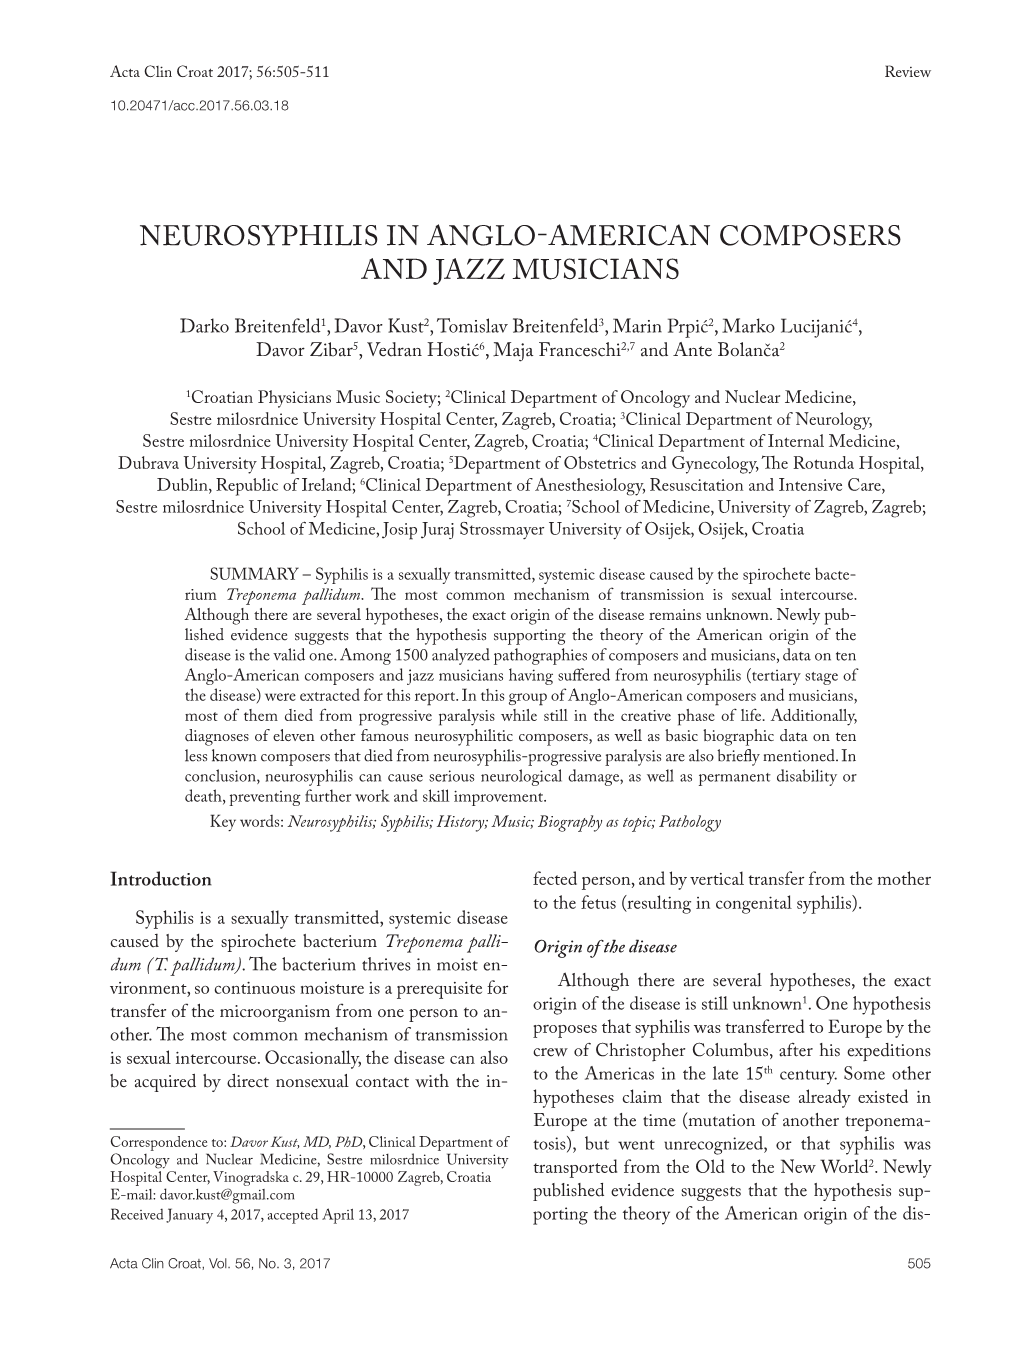 Neurosyphilis in Anglo American Composers And